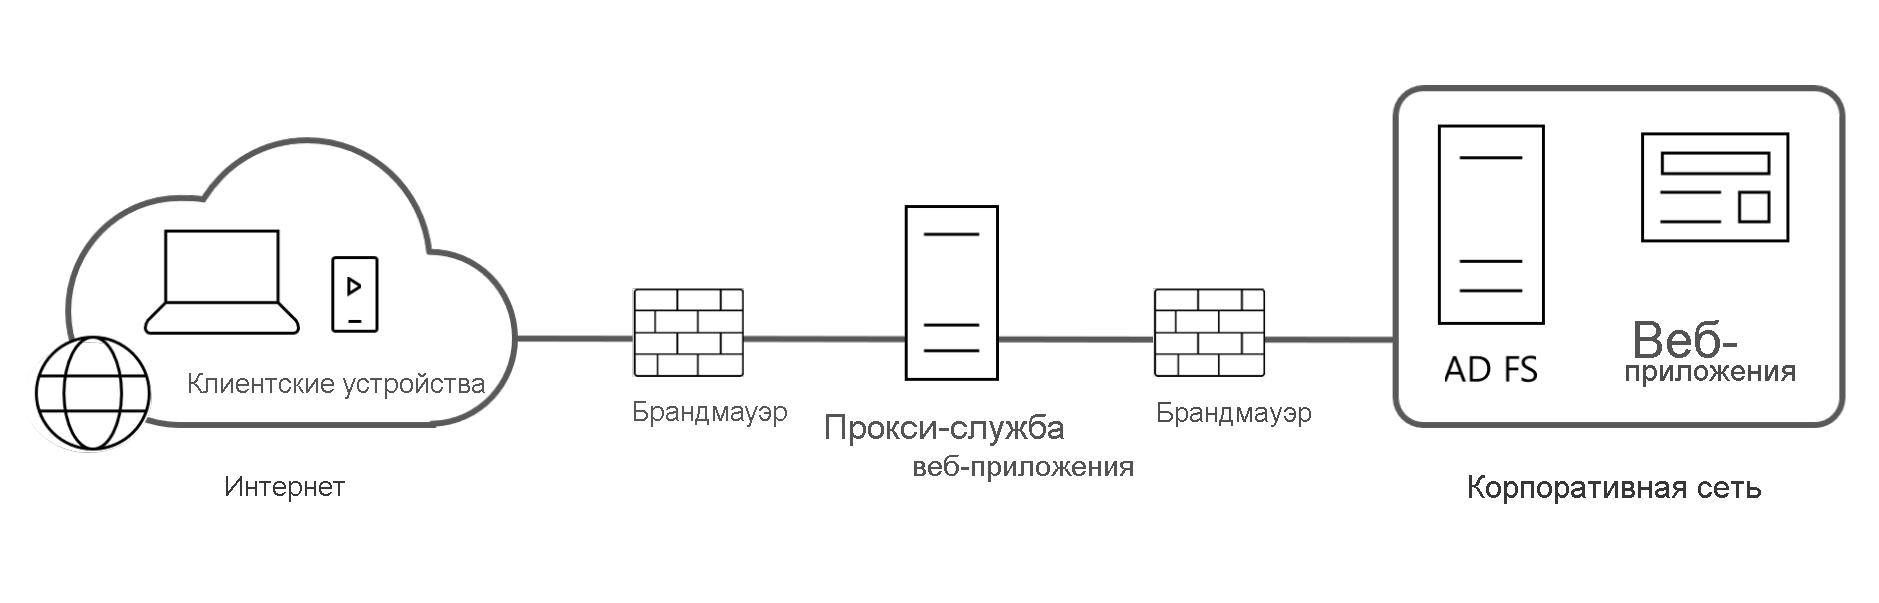 A diagram that displays a typical WAP architecture.